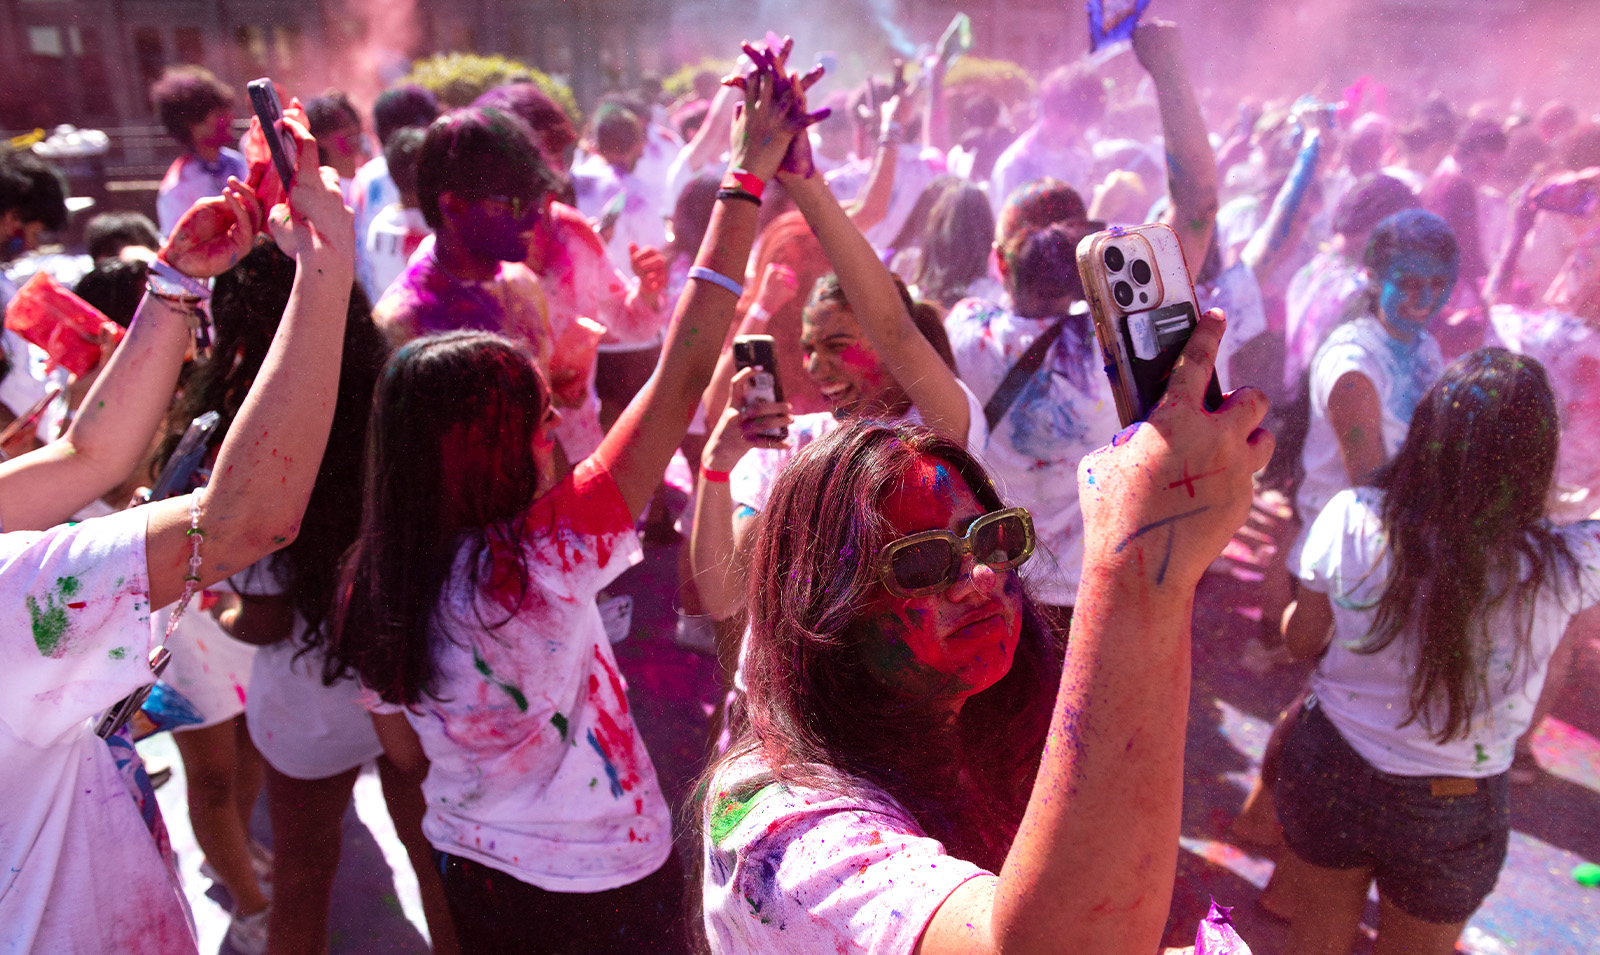 Crowd of students covered in paint celebrating Holi.